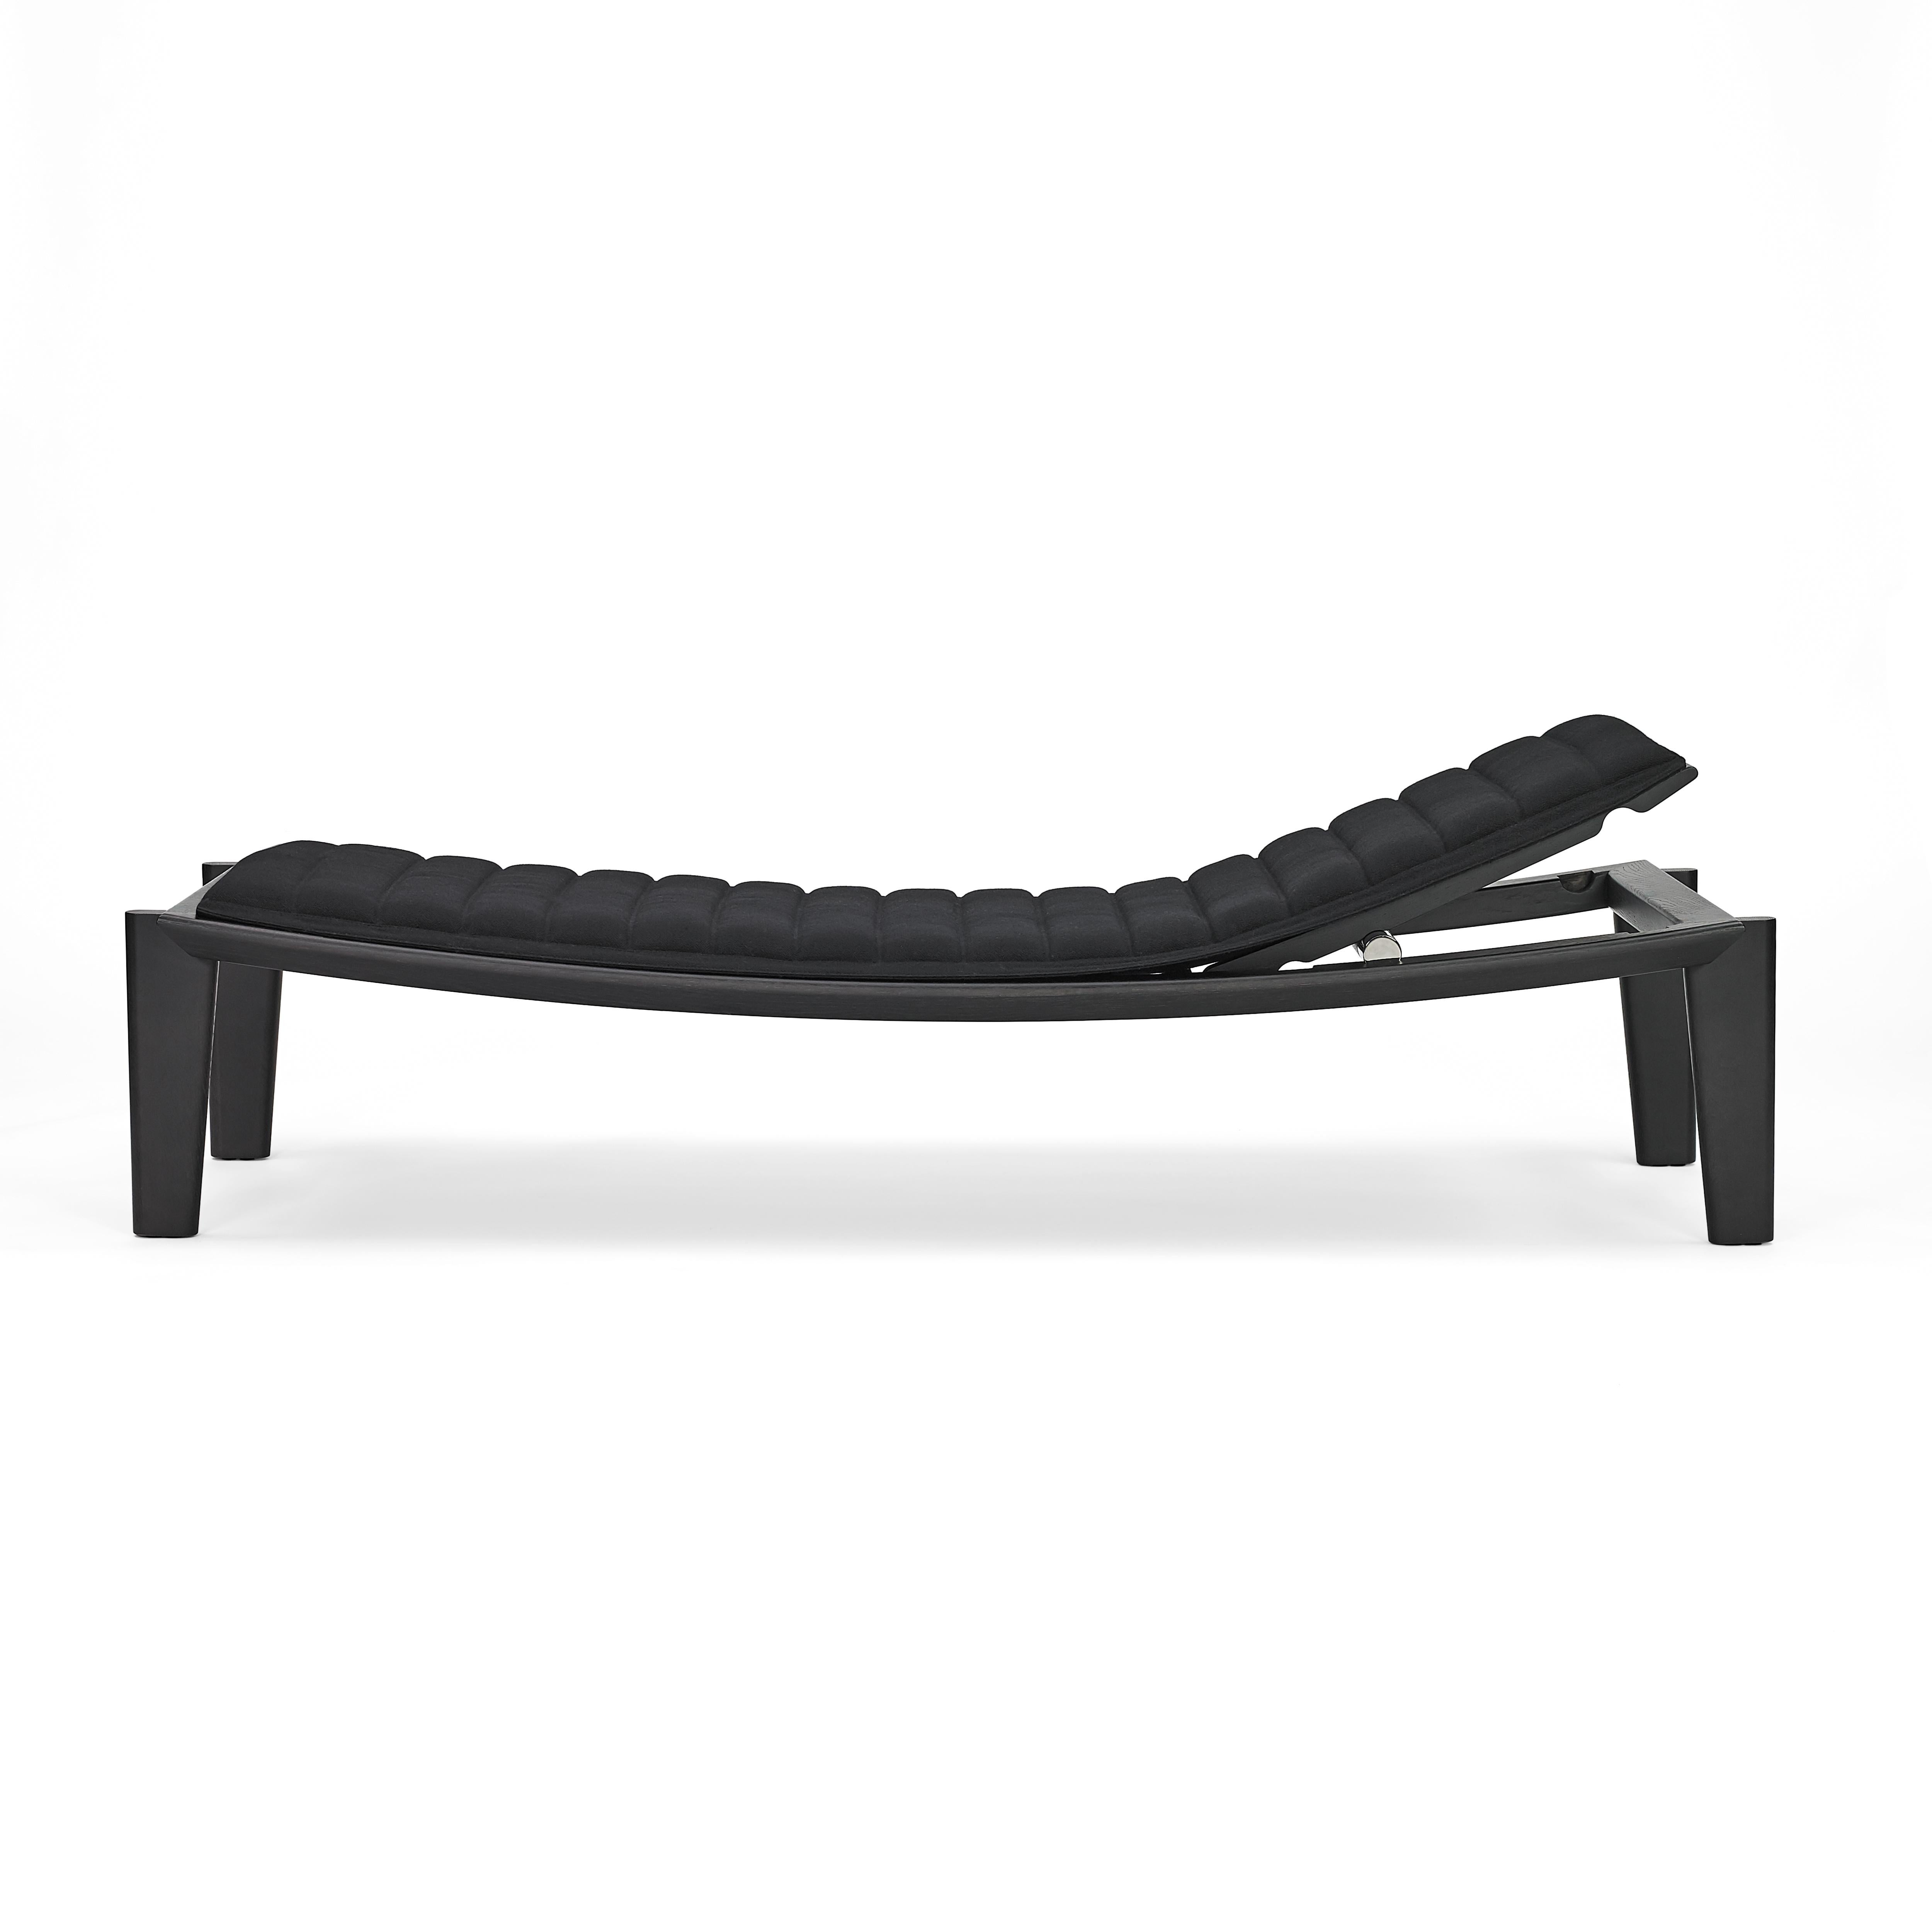 Ulisse is a daybed that becomes a symbol for relaxing and comfort, and with its large, free-stretched reclining surface, almost looks like a pictogram of a daybed. In its simple, symbolic elegance, the daybed arouses associations with archaic